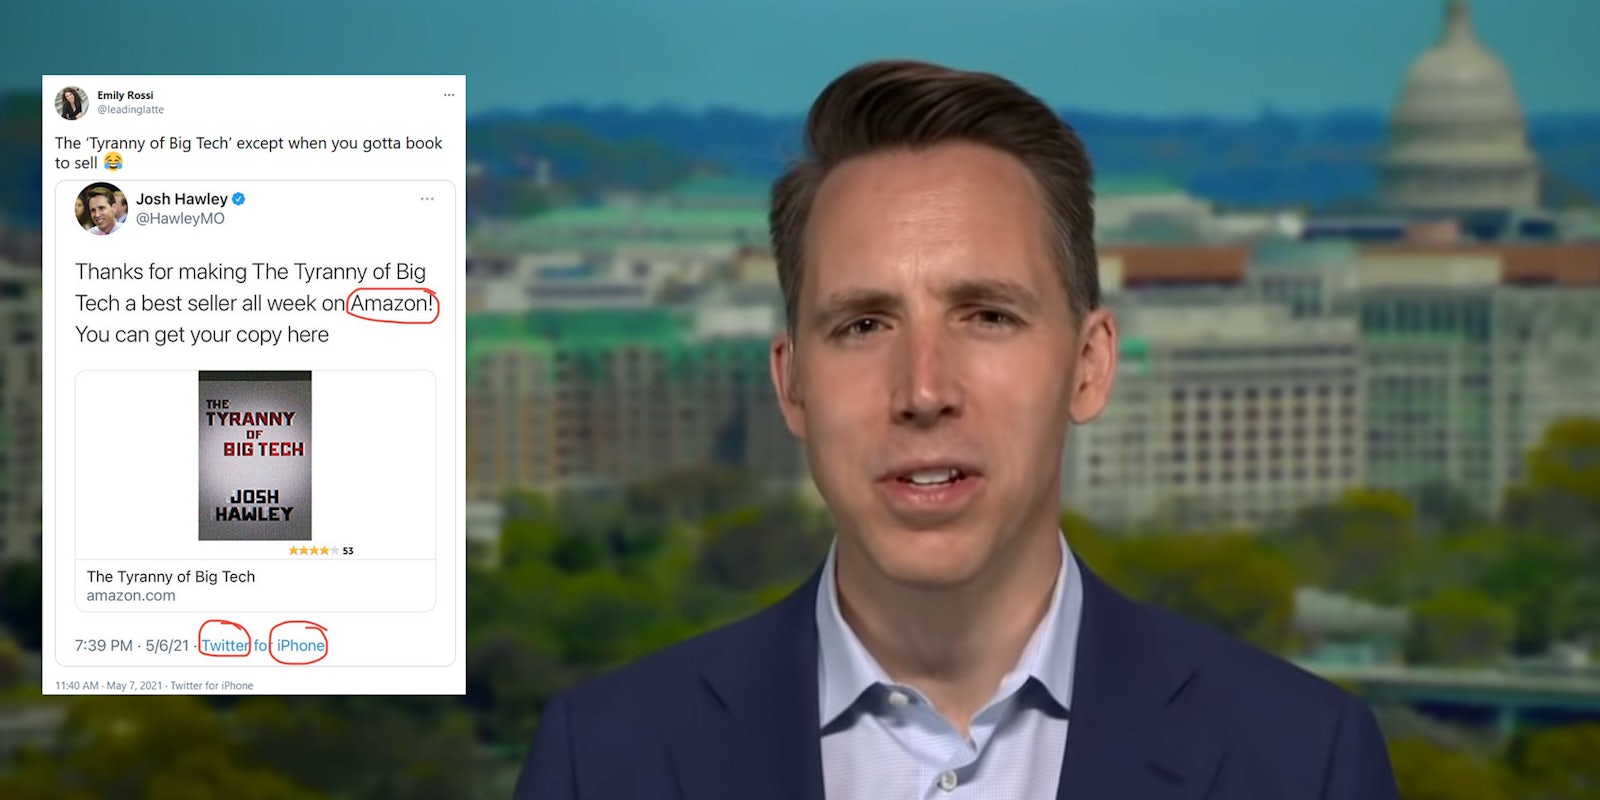 Sen. Josh Hawley speaking on TV. Next to him is a tweet mocking him for hawking his book criticizing big tech in a tweet that has an Amazon link.